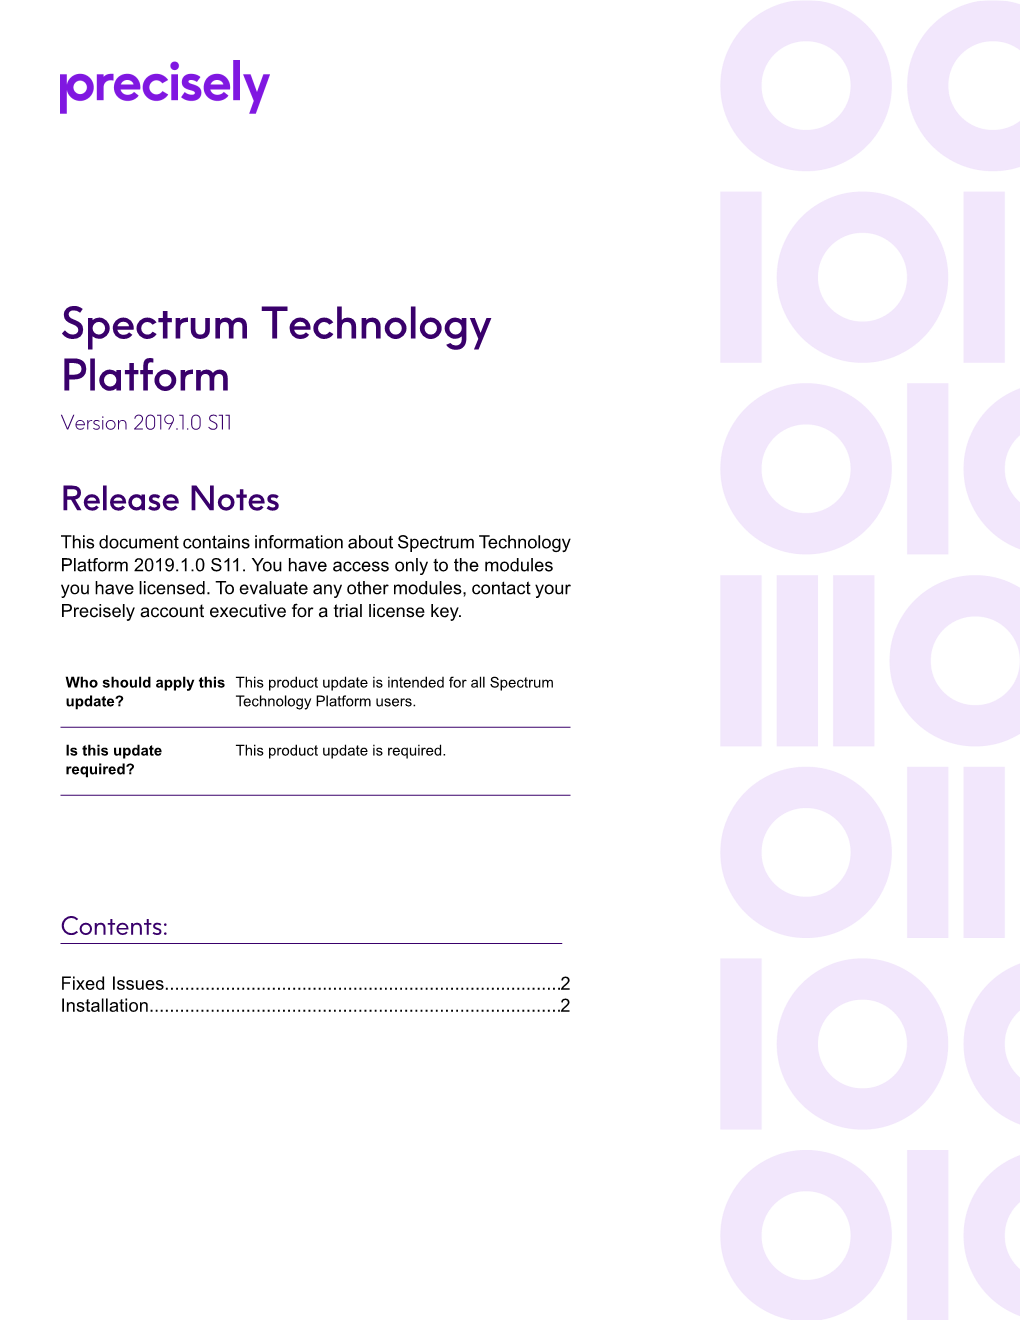 Release Notes This Document Contains Information About Spectrum Technology Platform 2019.1.0 S11